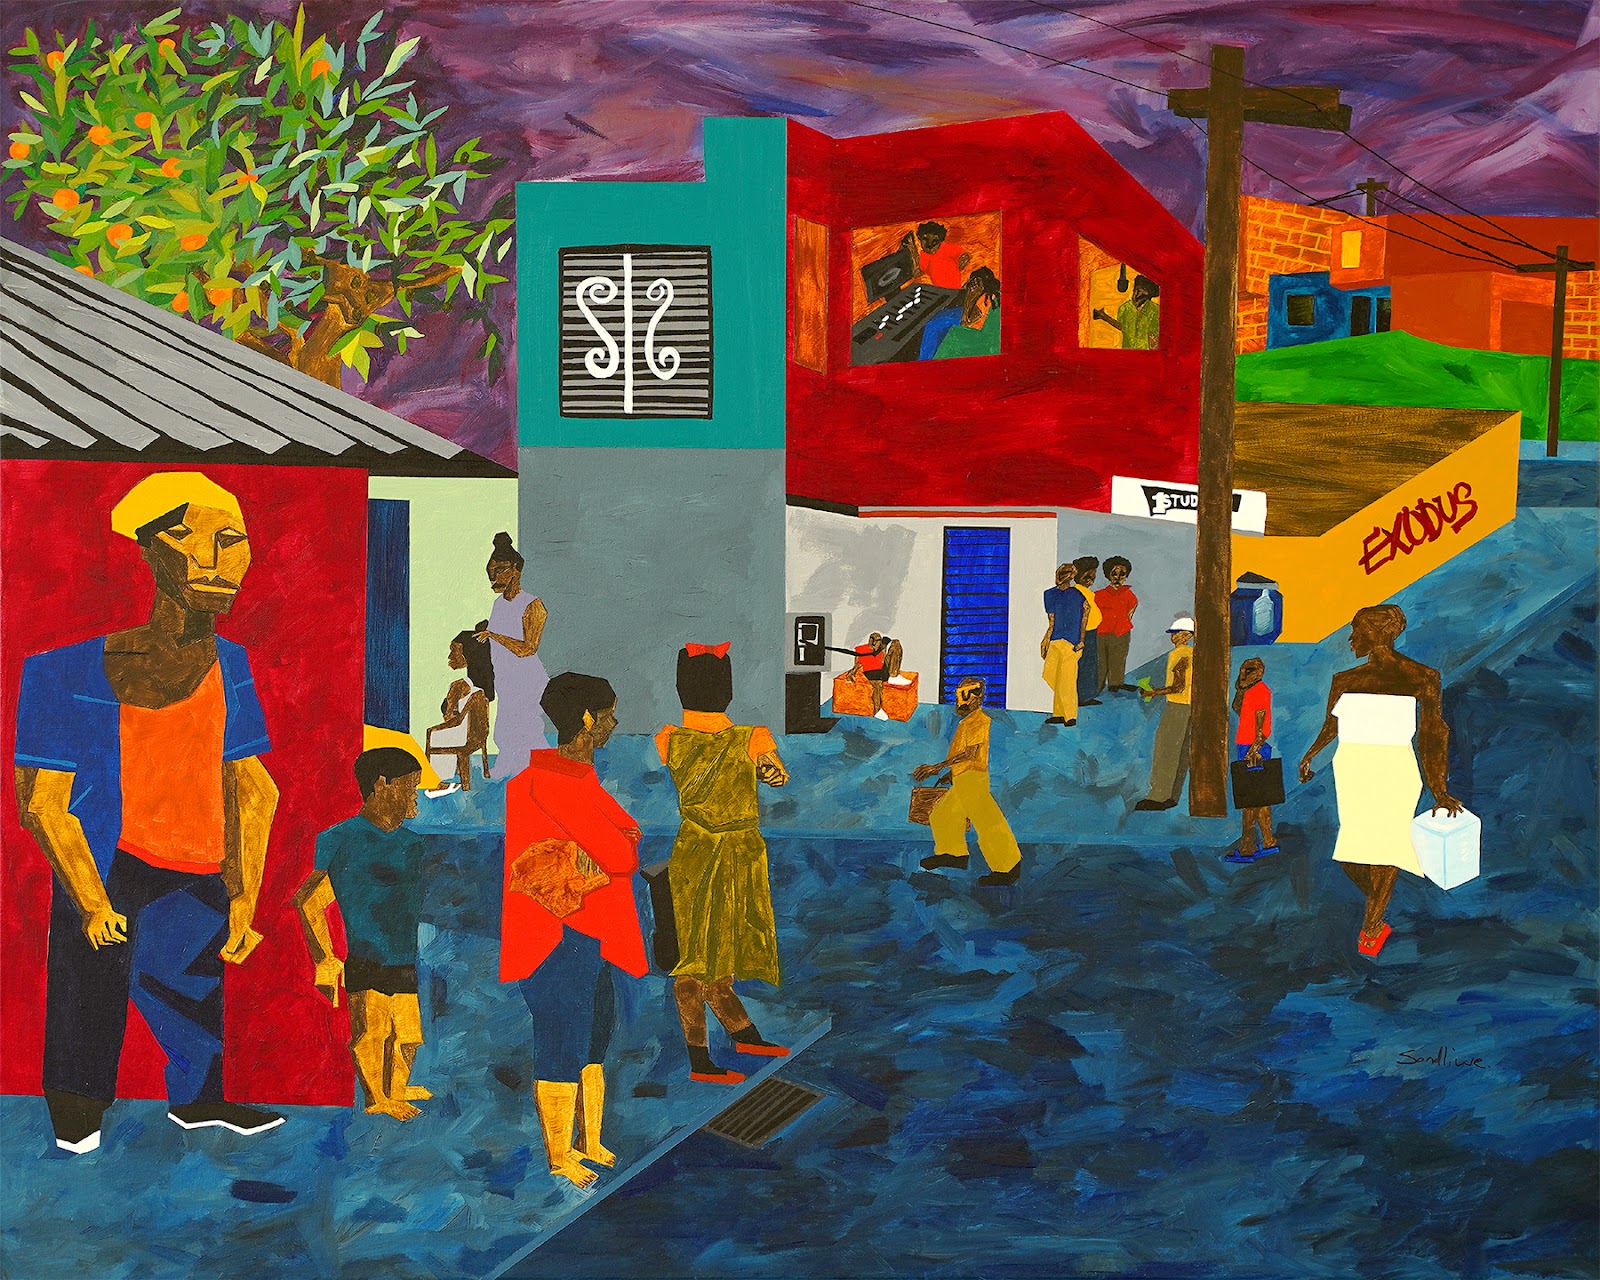 The masterful depiction of everyday life – an artistic review of Lubaina Himid’s Latest Exhibition